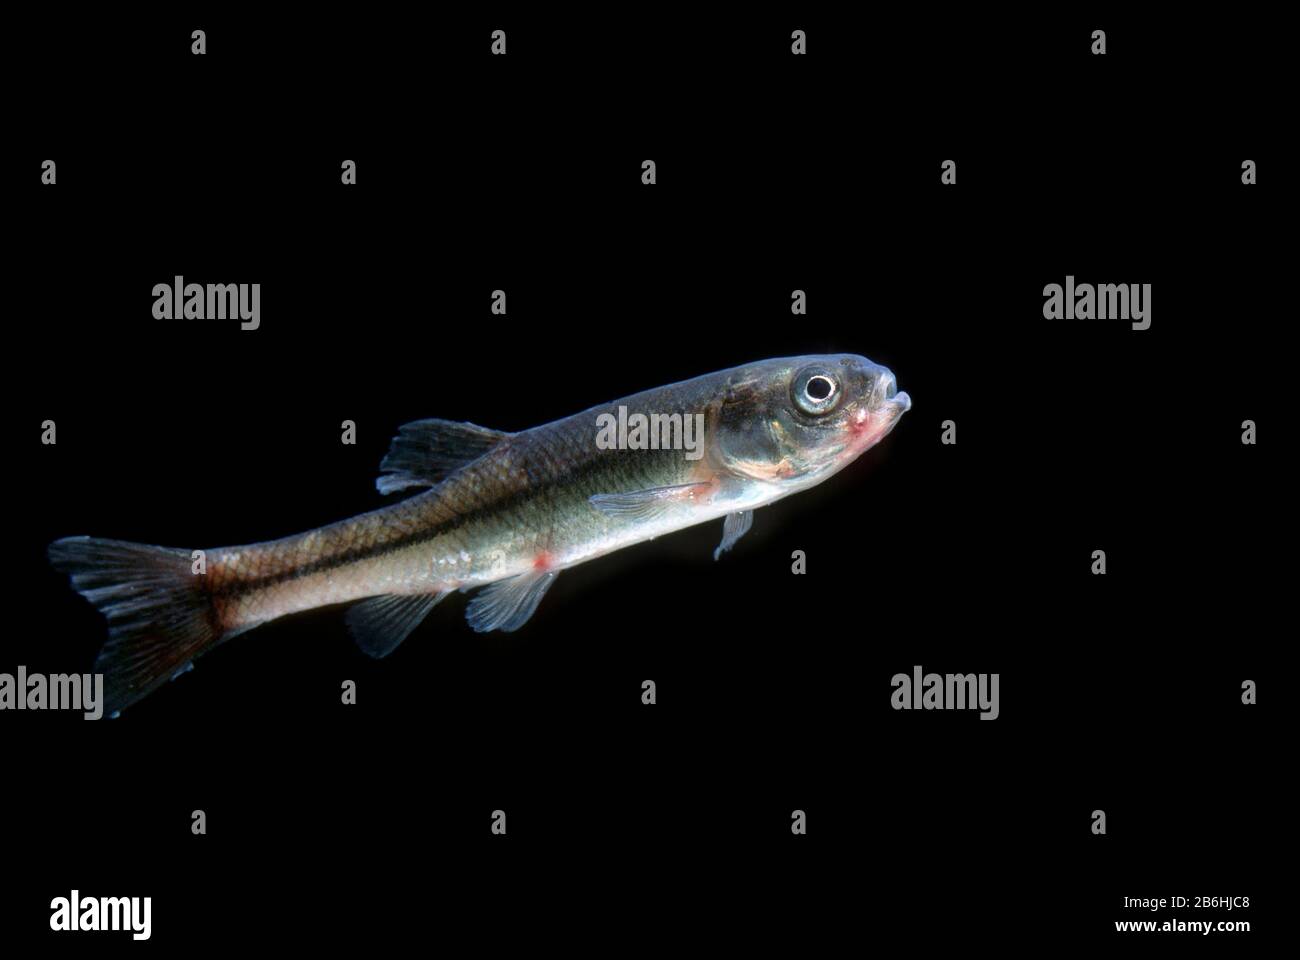 Fathead minnow, (Pimephales promelas), invasive species recently introduced to Europe, captive, France Stock Photo